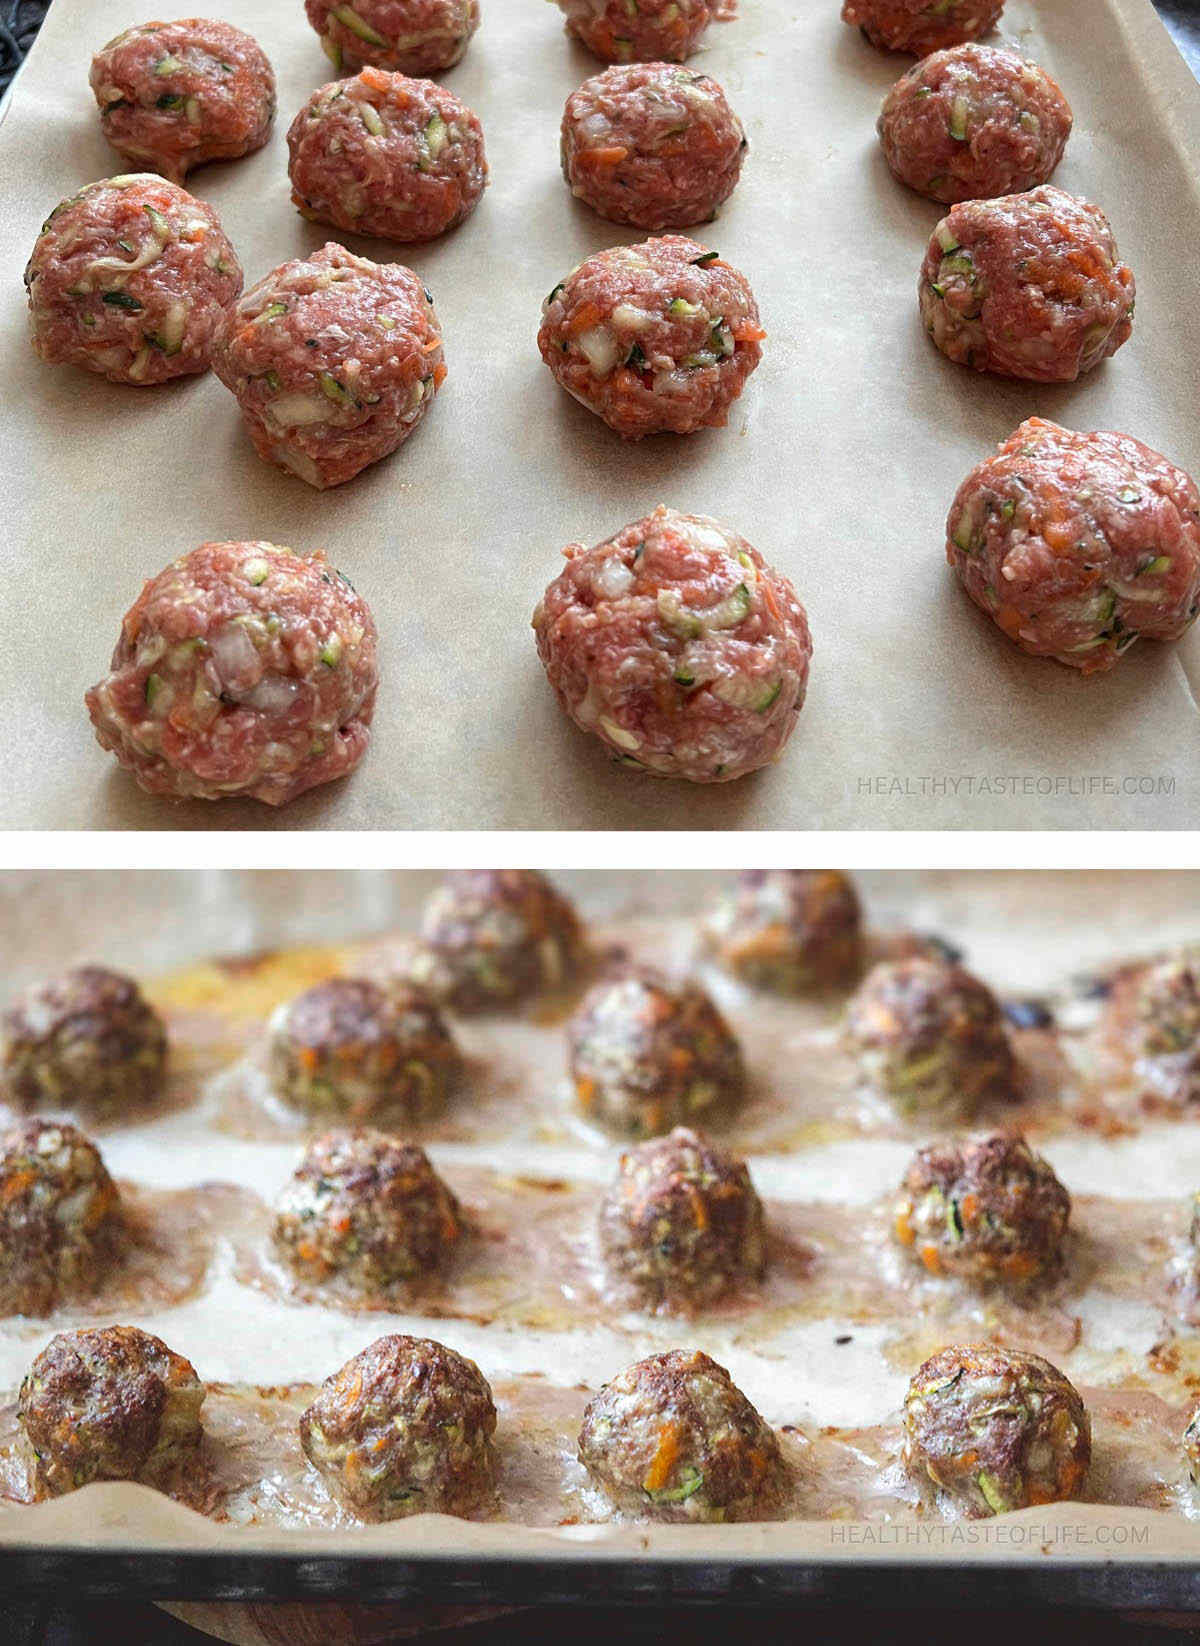 Process shots showing raw rolled beef meatballs vs baked beef meatballs.